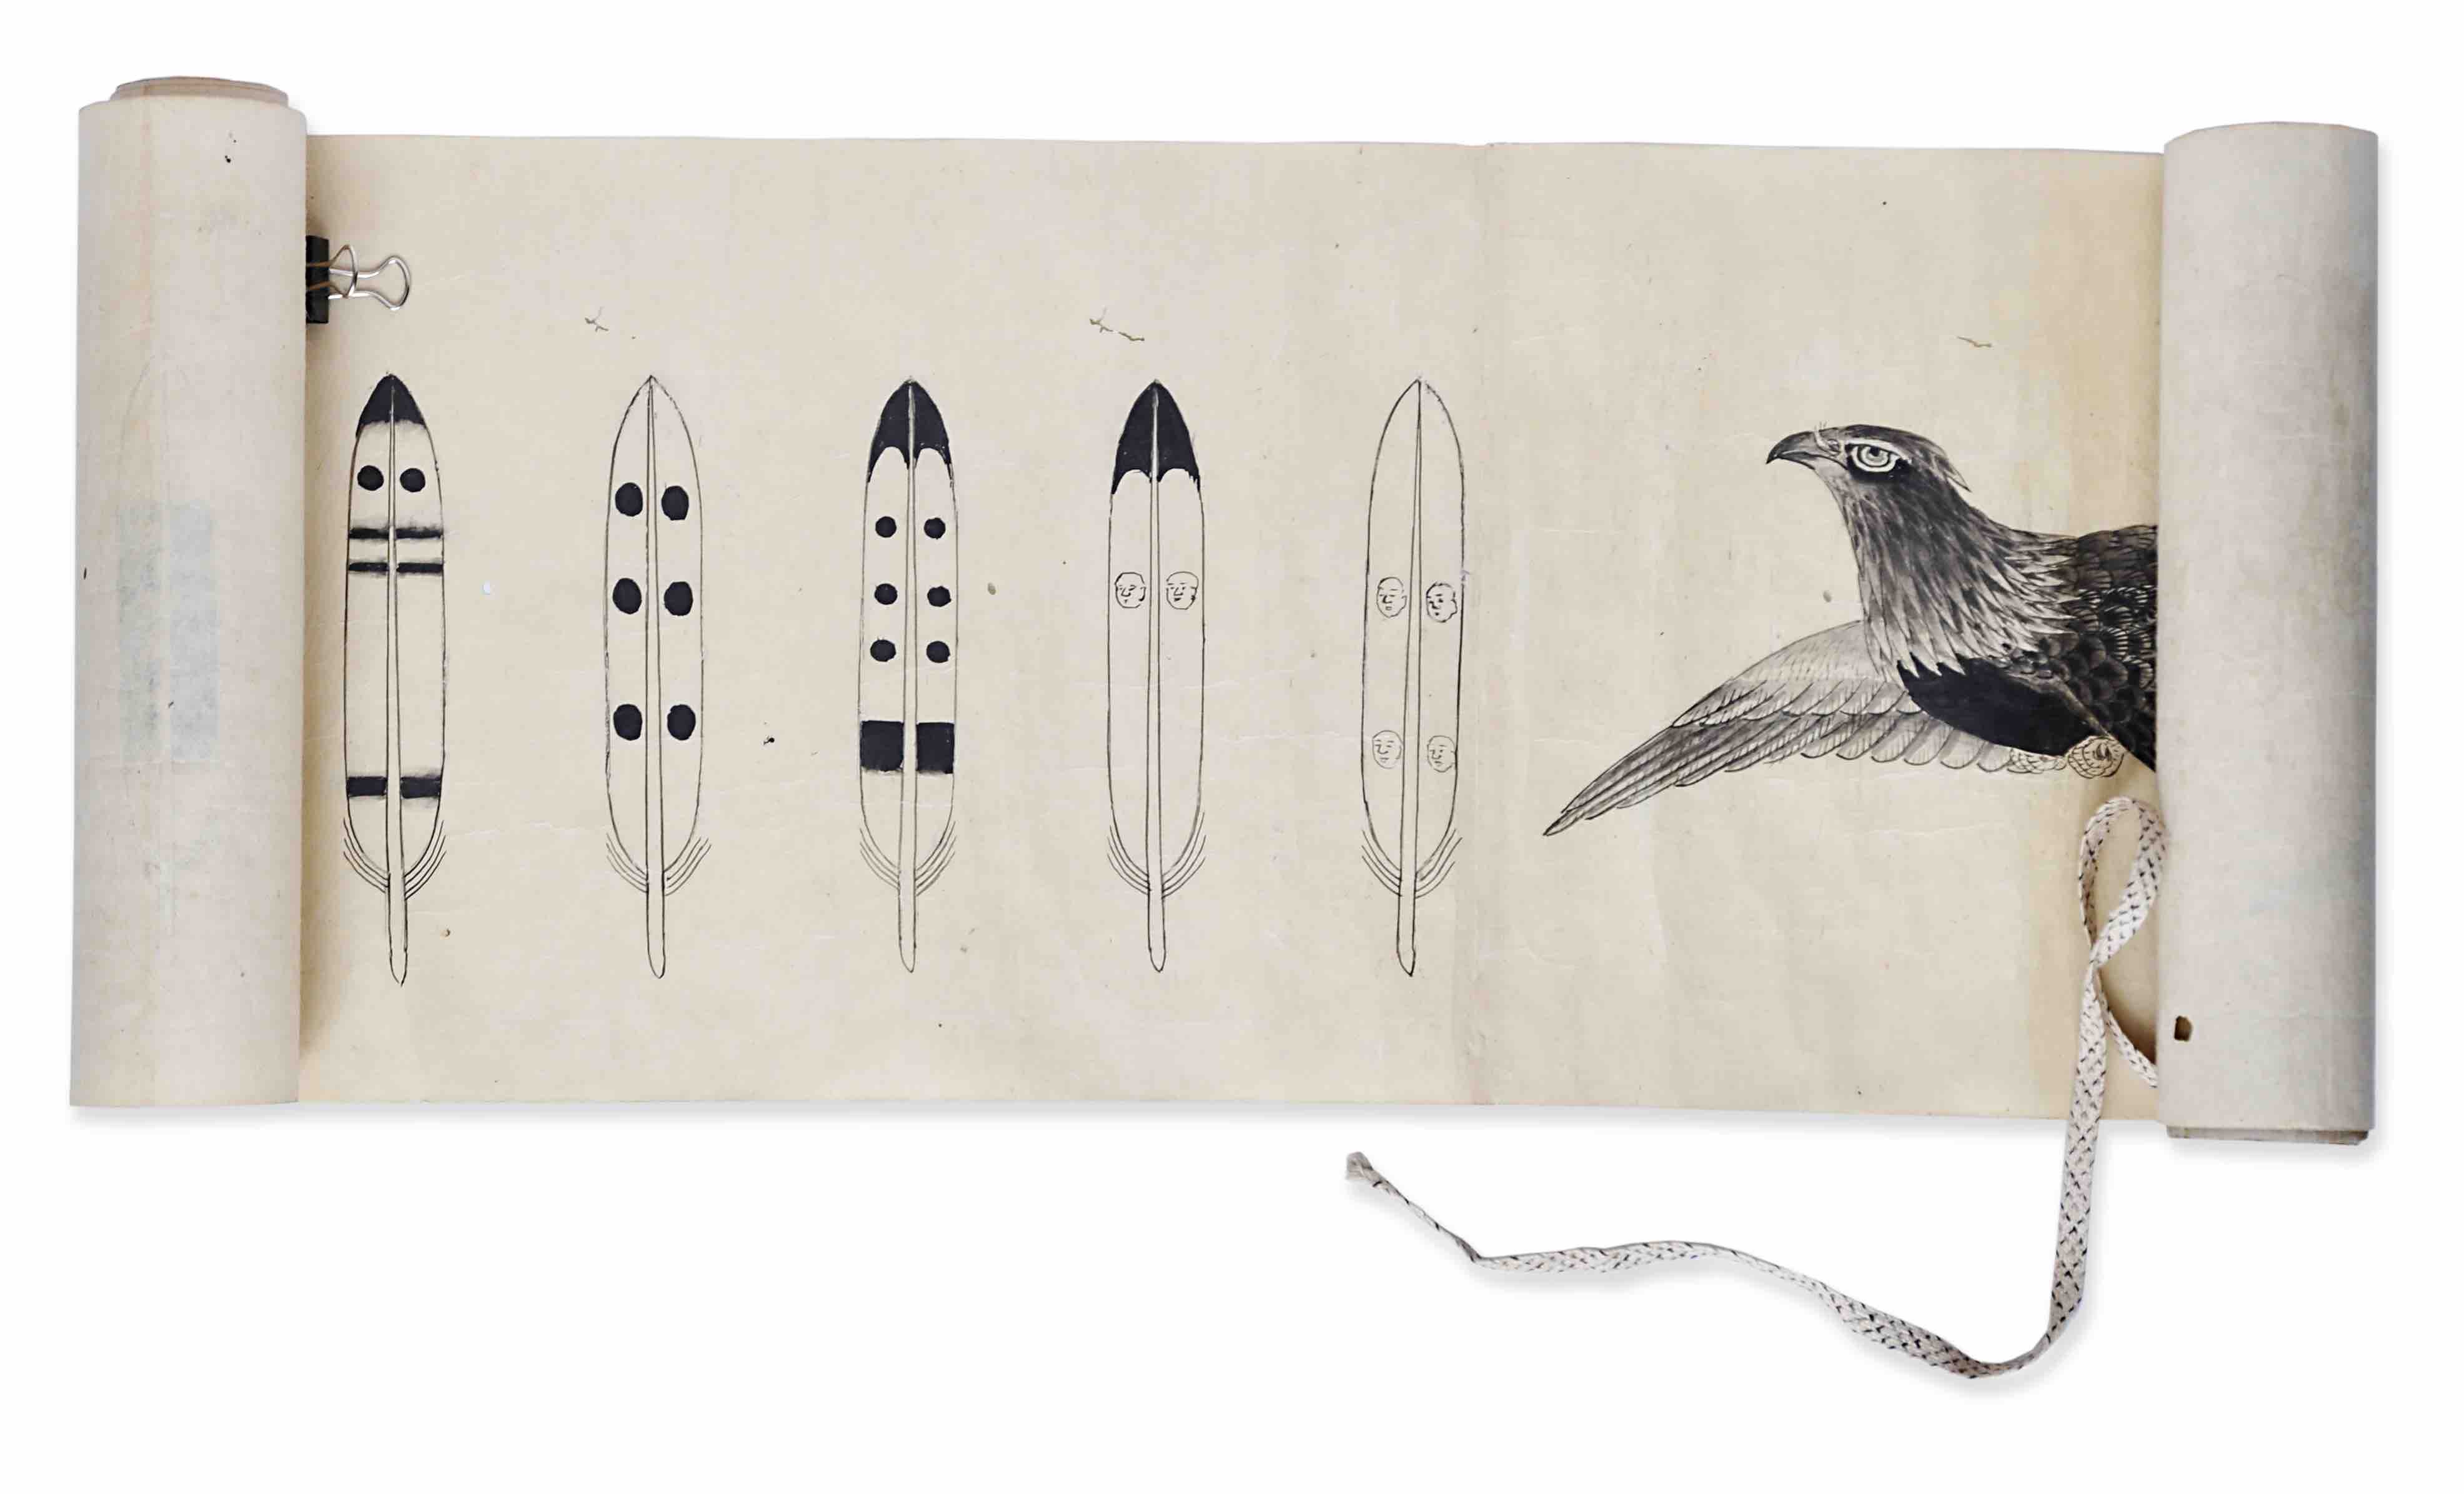 [JAPANESE FEATHERS FROM EDO-PERIOD]. - [Hand-painted manuscript scroll of different types of feather (or fletching) used in the traditional Japanese arrow making]. About mid or late 18th century.